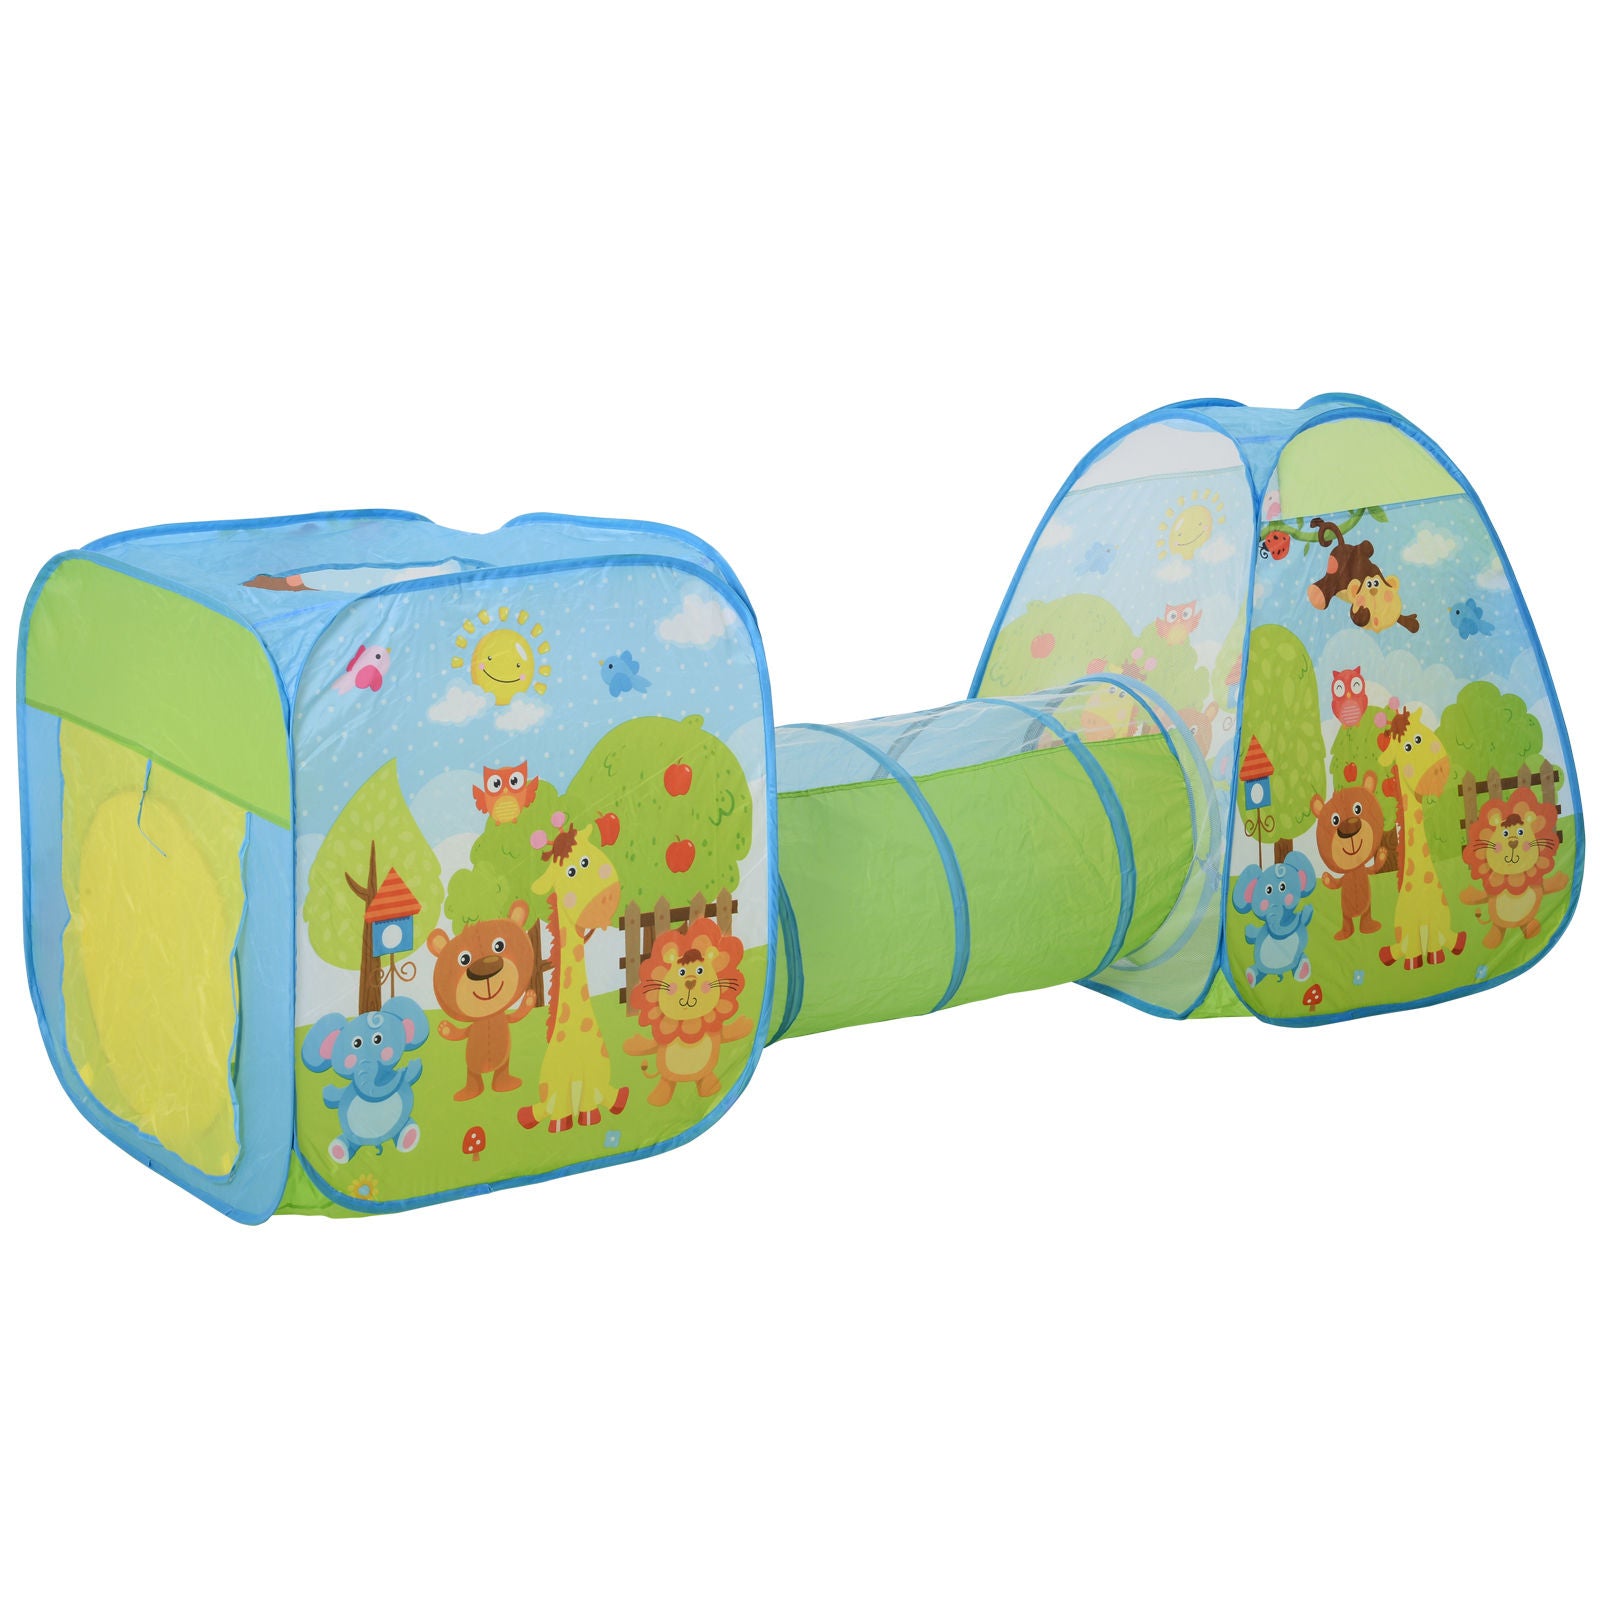 Nancy's Andys Cove Kinderspeeltent - Groen - Polyester, Staal - 90,55 cm x 29,13 cm x 36,61 cm